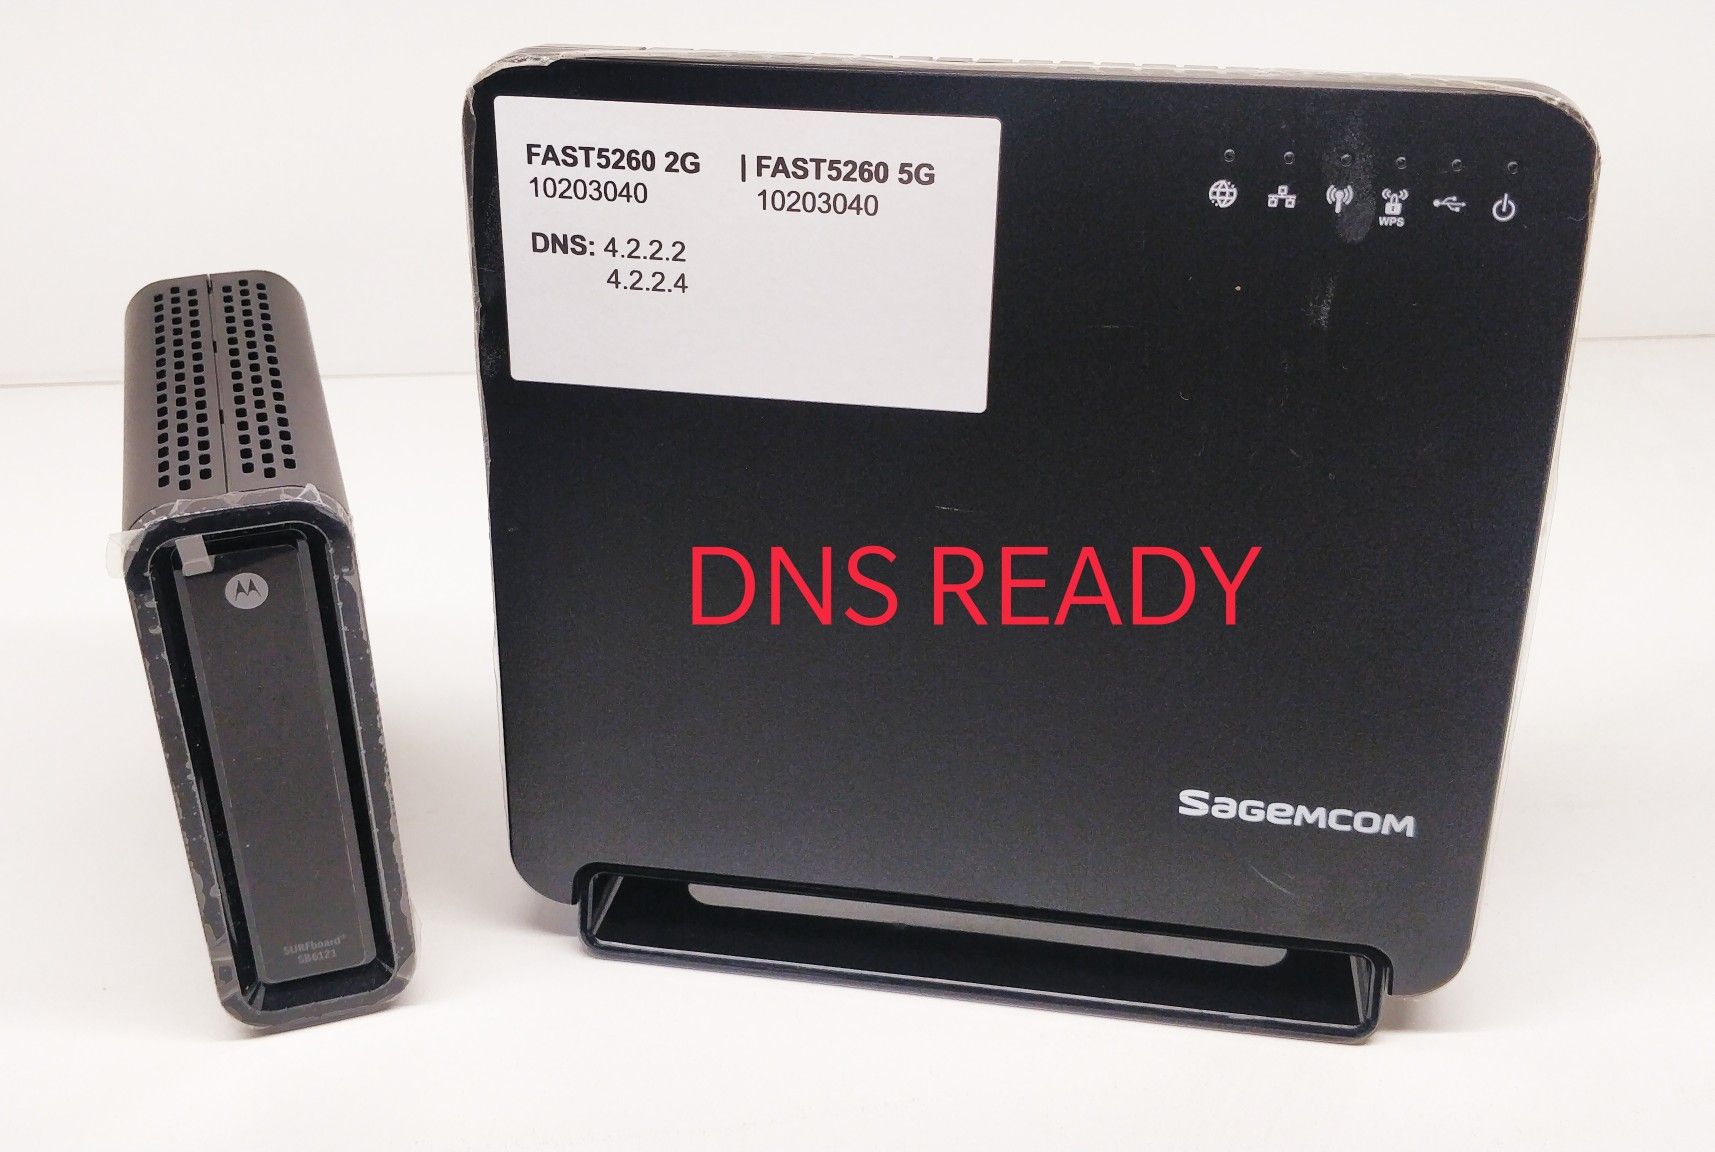 SB6121 + fast5260 AC router combo - DNS READY!